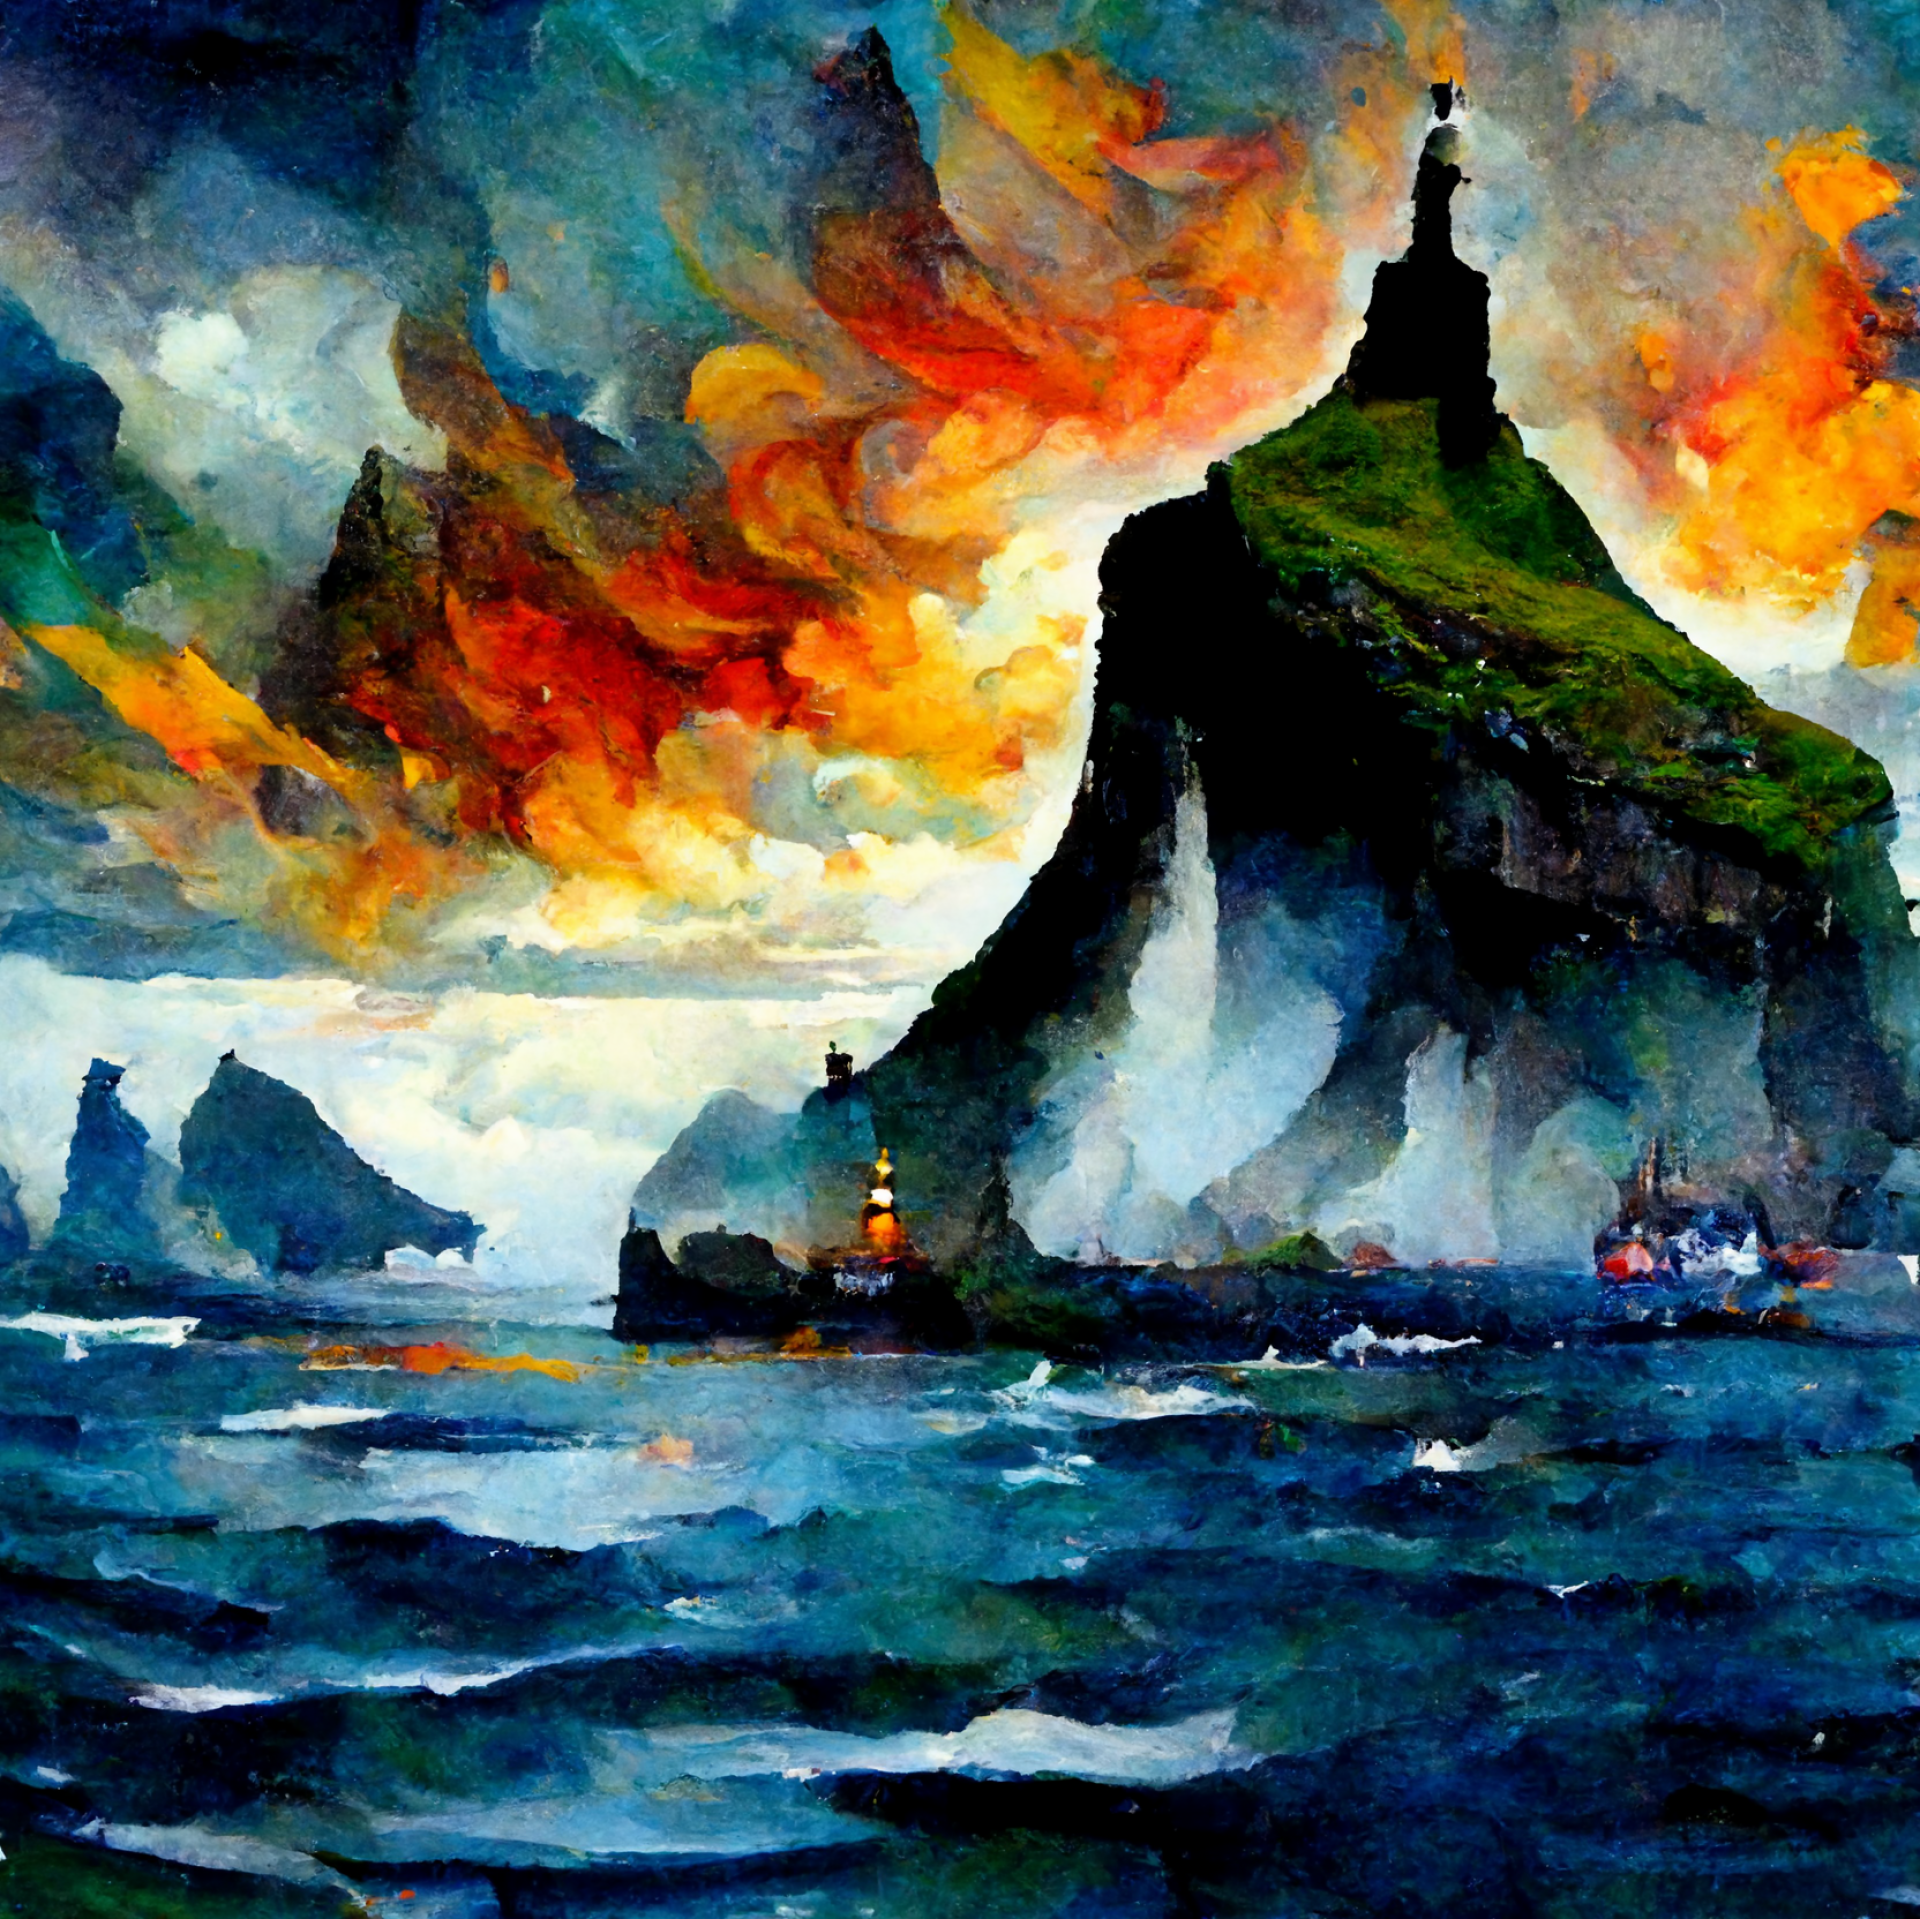 AI-generated image from Midjourney, the Faroe Islands inspired by Leonid Afremov.